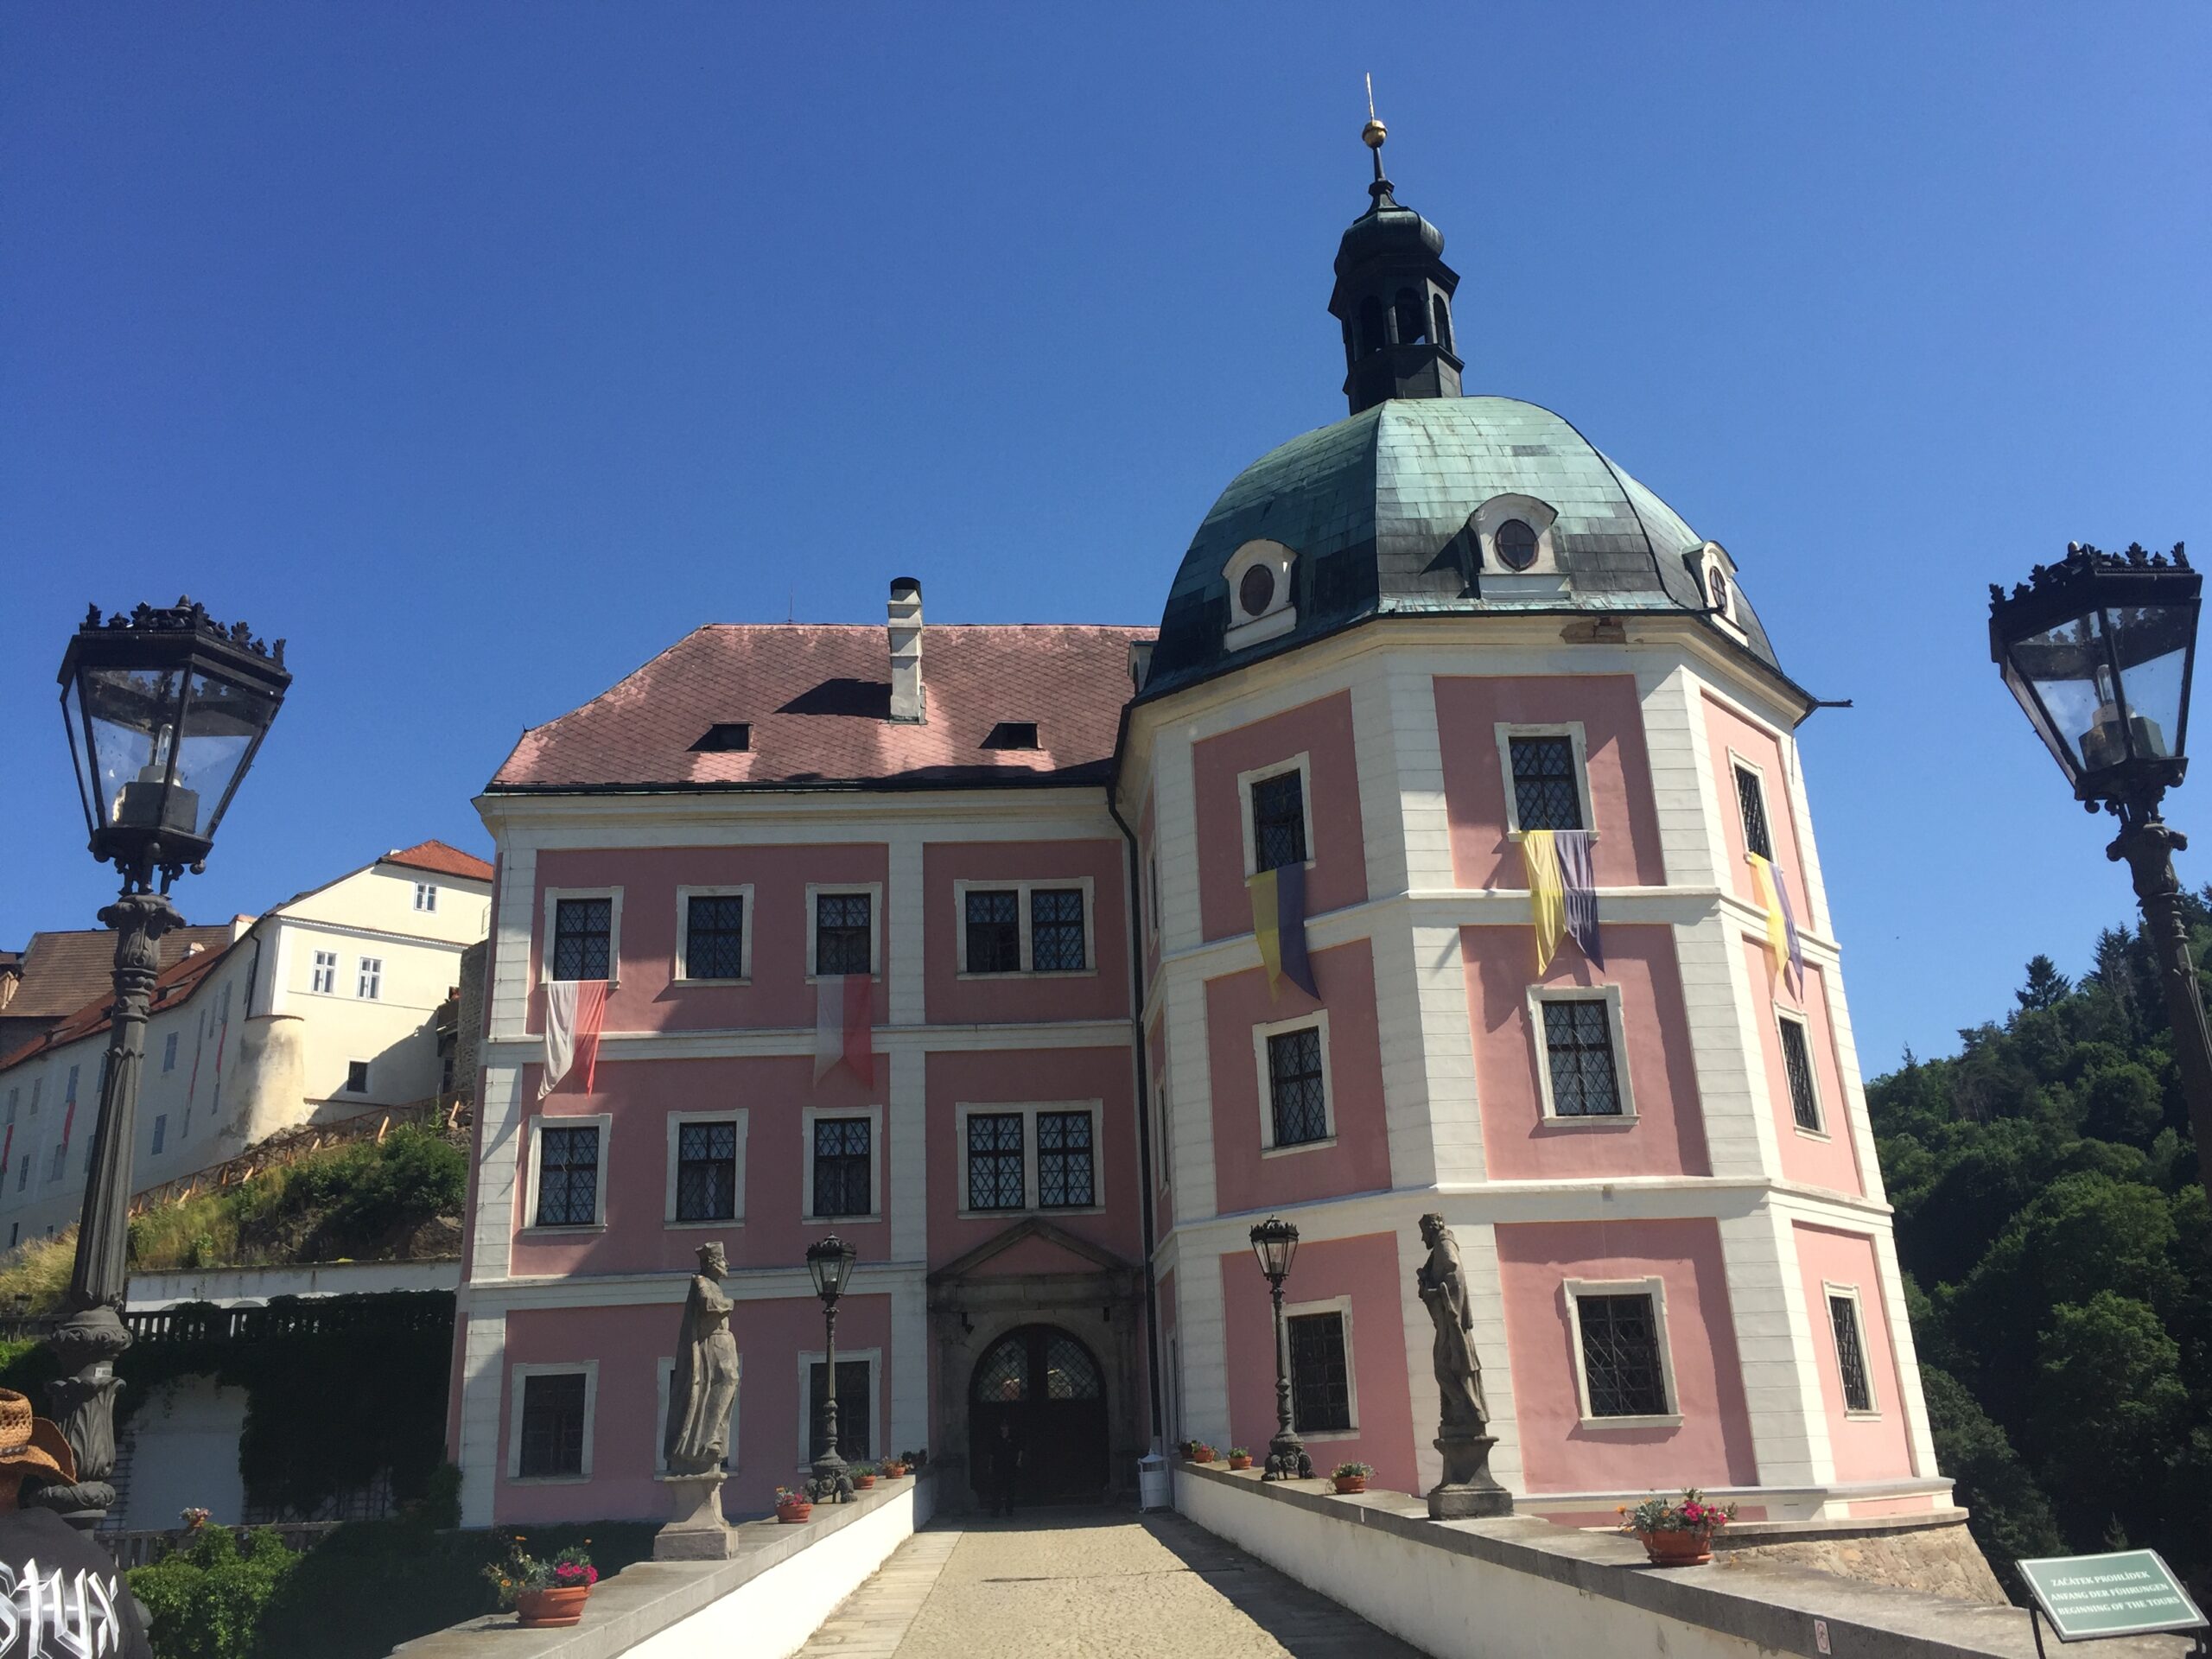 EUROPE – DAY 5